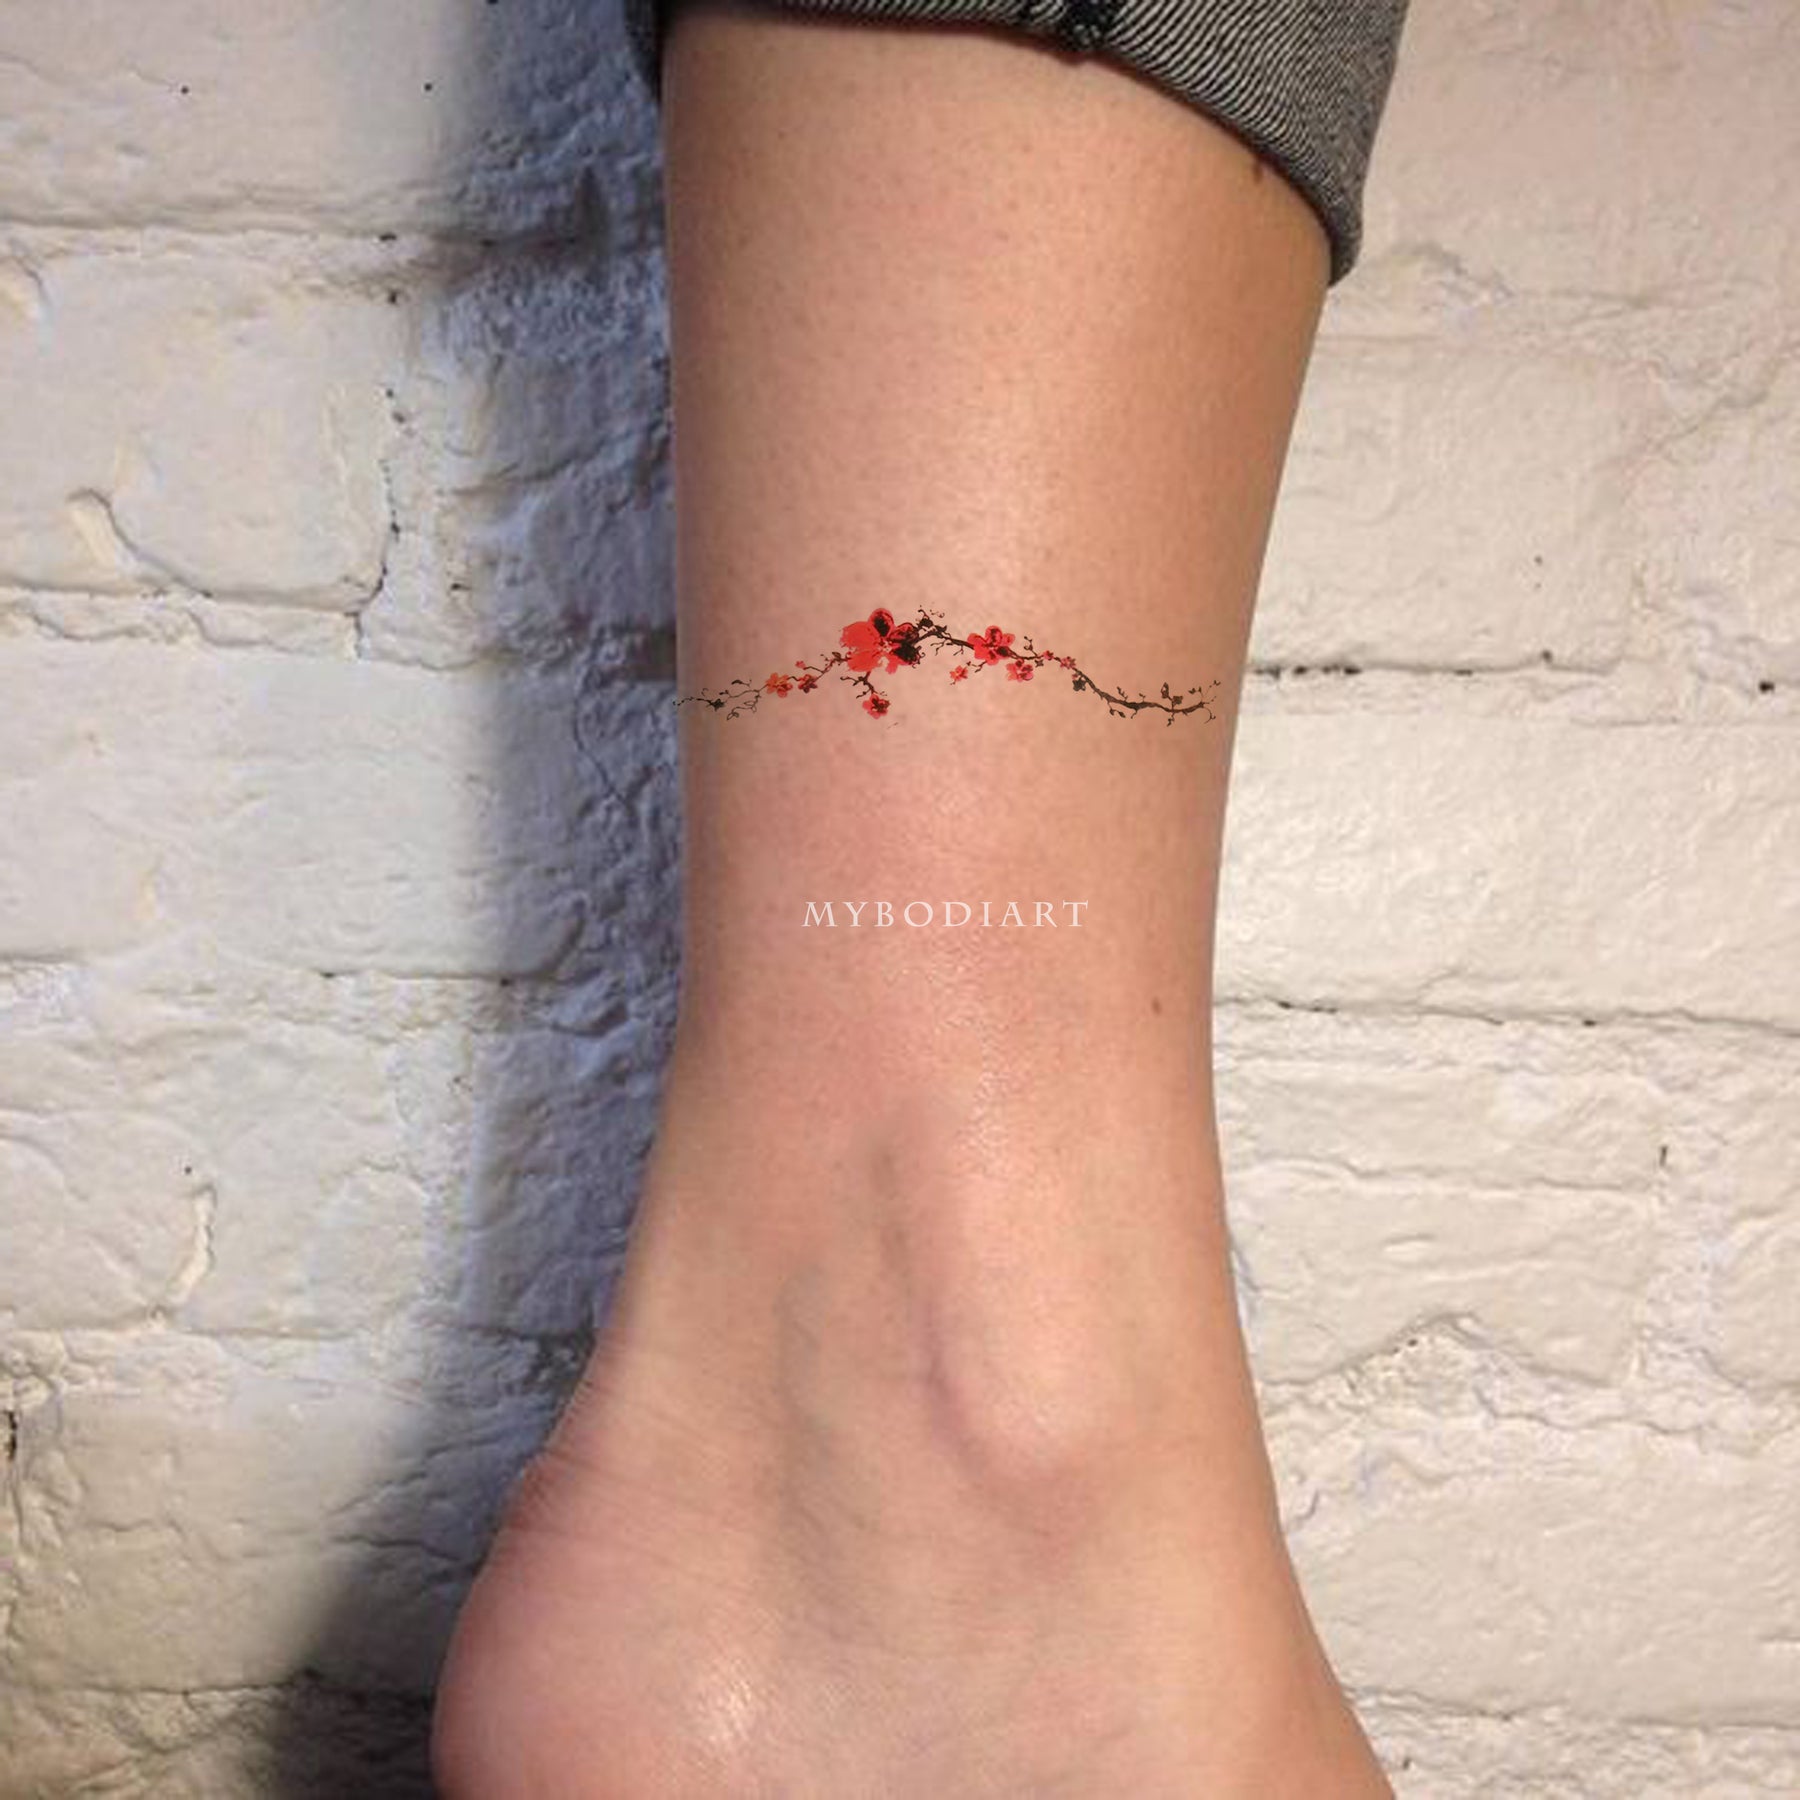 86 Eyeopening Ideas Of Vine Tattoos To Soothe Your Mind and Soul